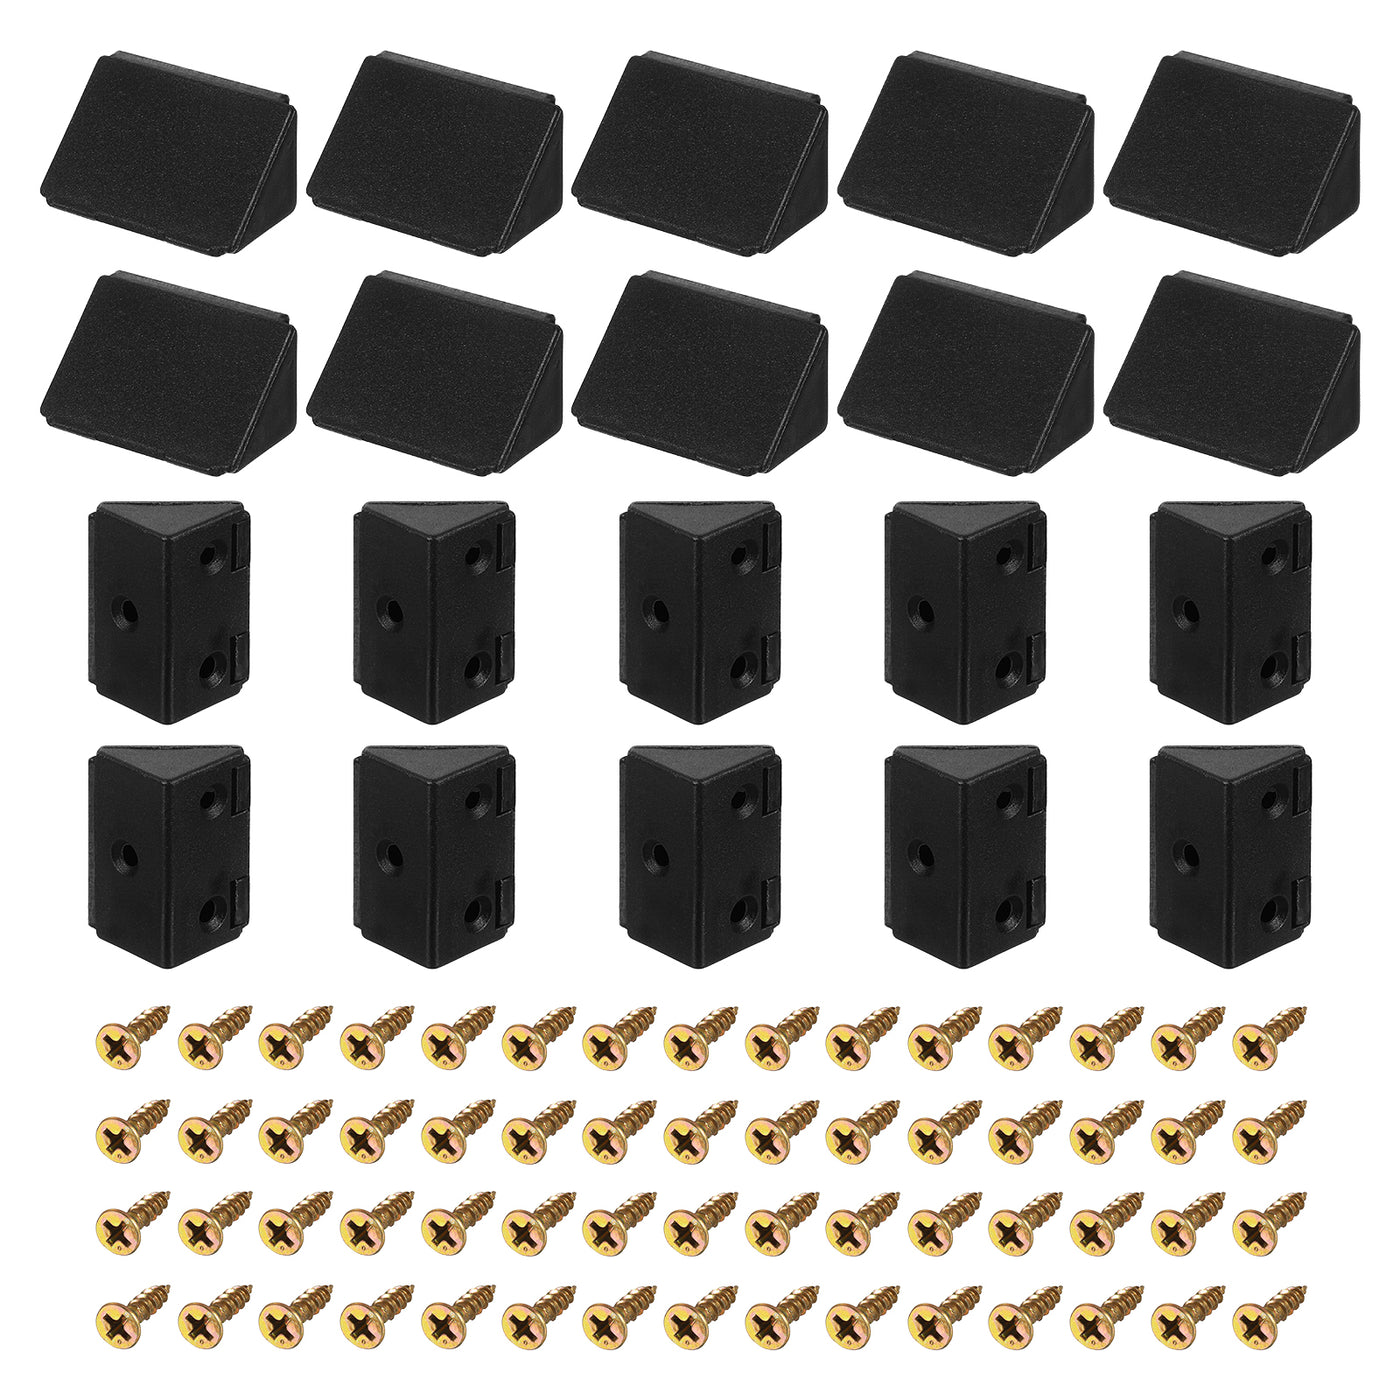 uxcell Uxcell 50Pcs 90 Degree Plastic Corner Braces with Cover Cap, 43x23x23mm Nylon Shelf Right Angle Brackets with Screws for Cabinets, Cupboards (Black)